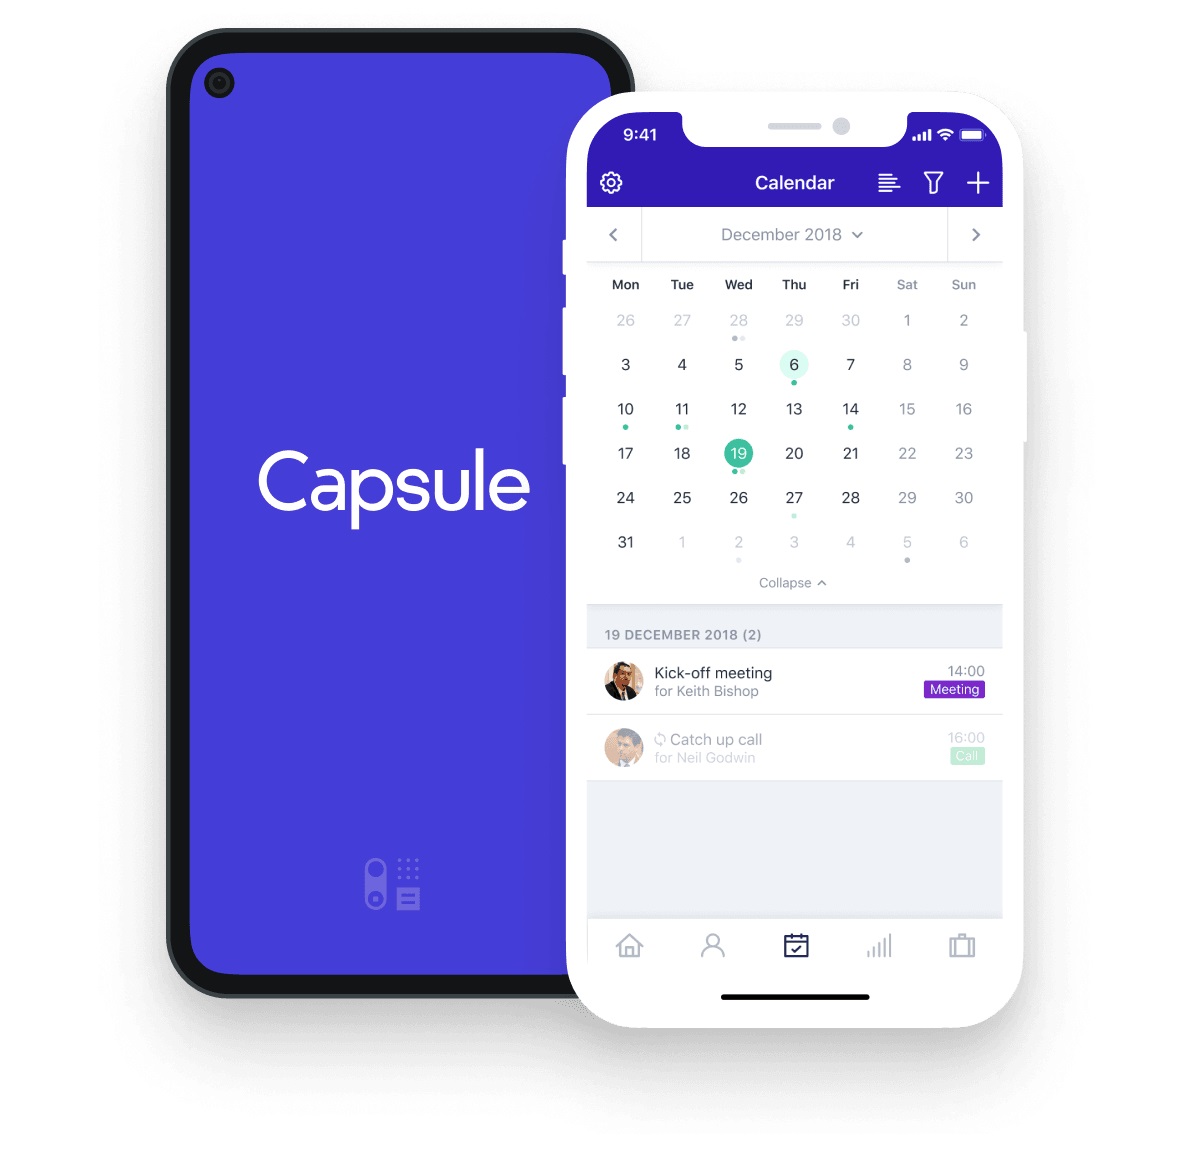 Capsule App: Revolutionizing News Curation With AI And Human Editors